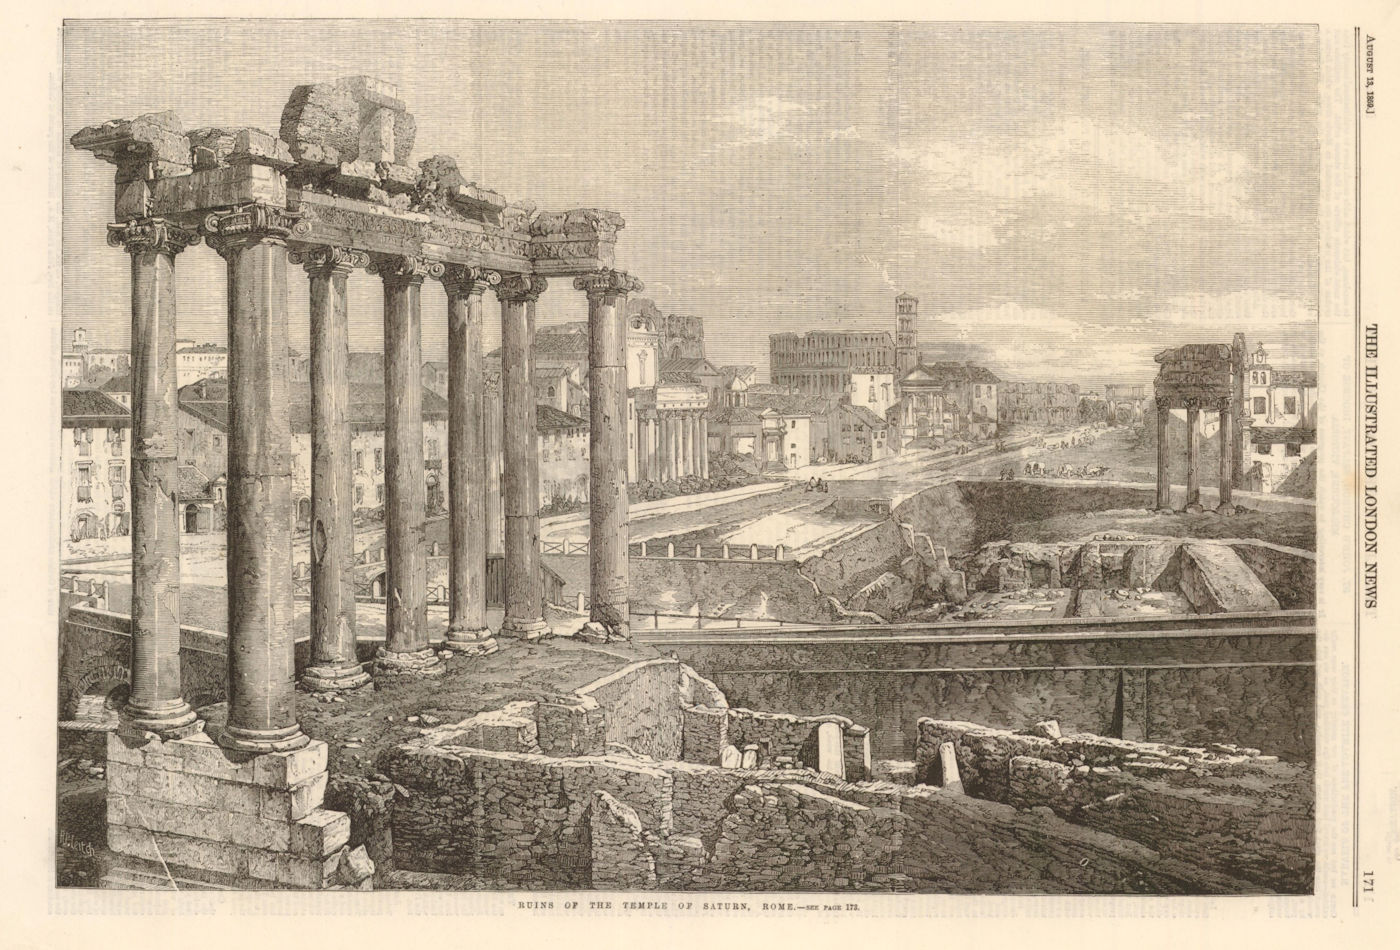 Associate Product Ruins of the Temple of Saturn, Rome 1859 old antique vintage print picture